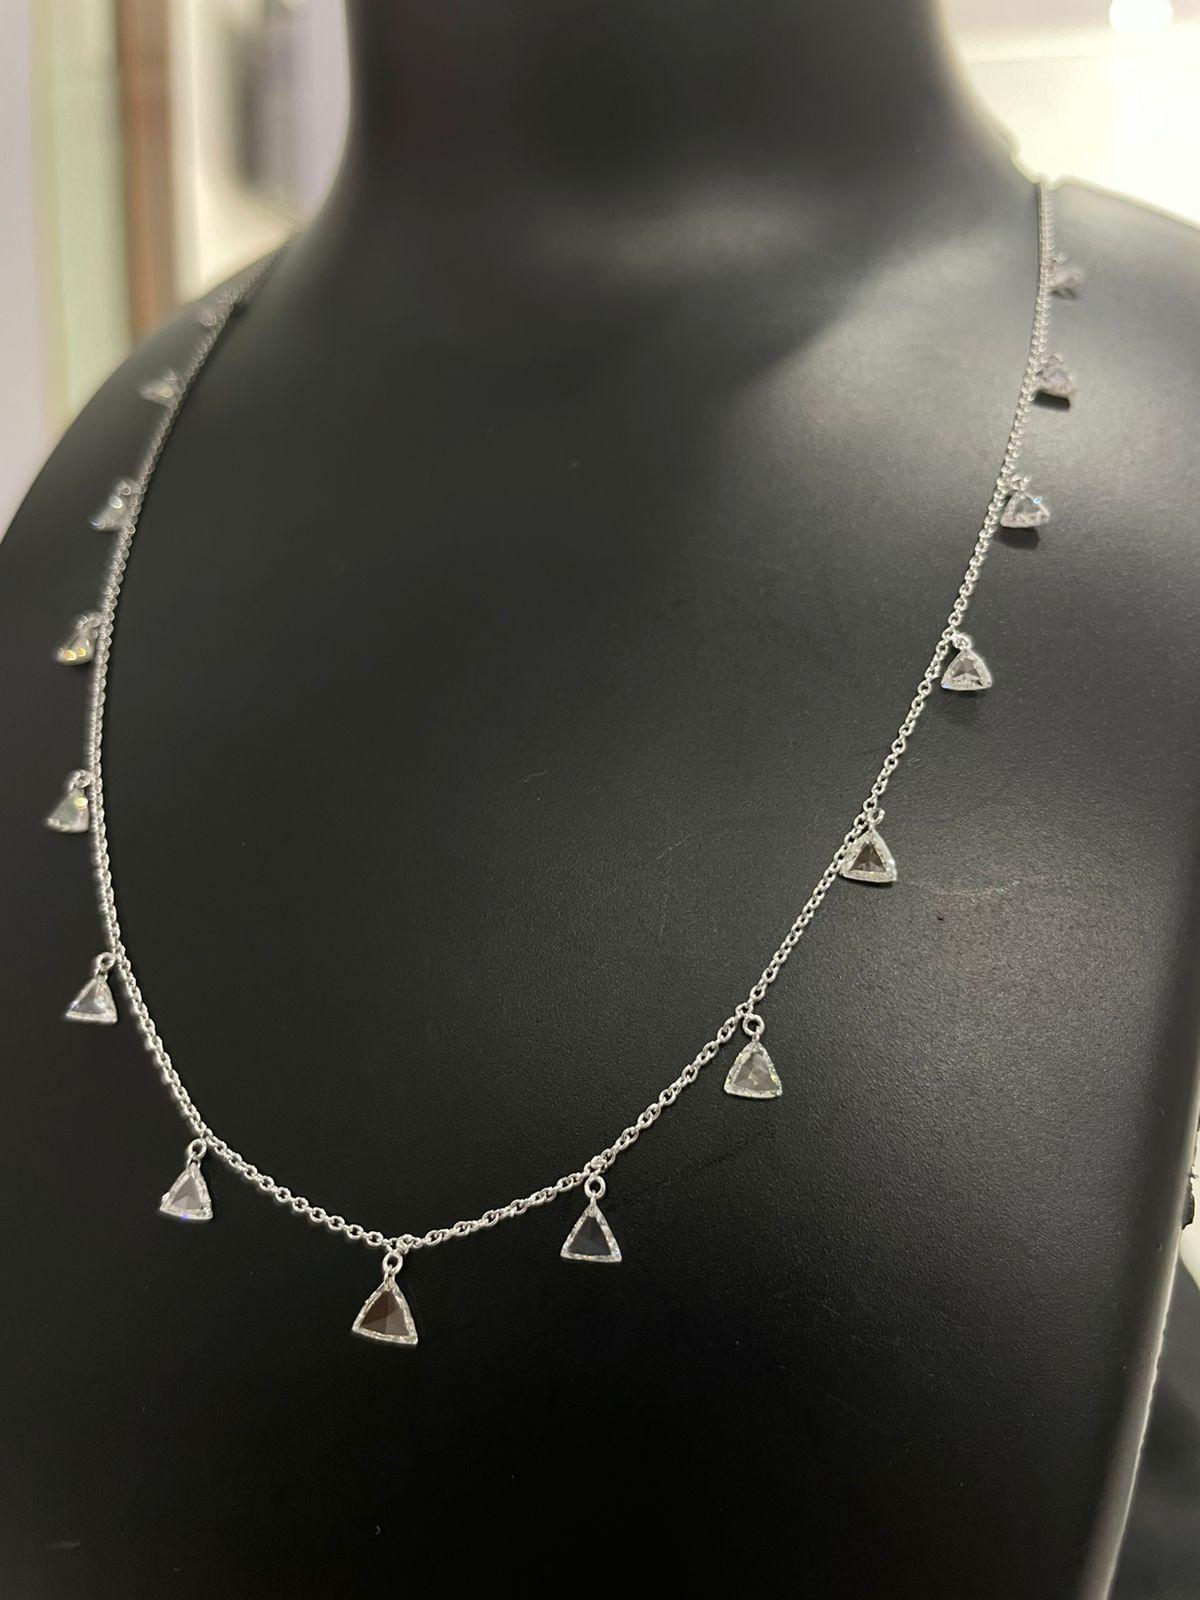 PANIM  Triangle Diamond Rosecut 18k White Gold Dangling Necklace

This unique choker necklace is suspended on an 18K fine gold chain by a total of two carats of dangling triangle-shaped diamond rosecuts. This exquisite rosecut necklace gives your